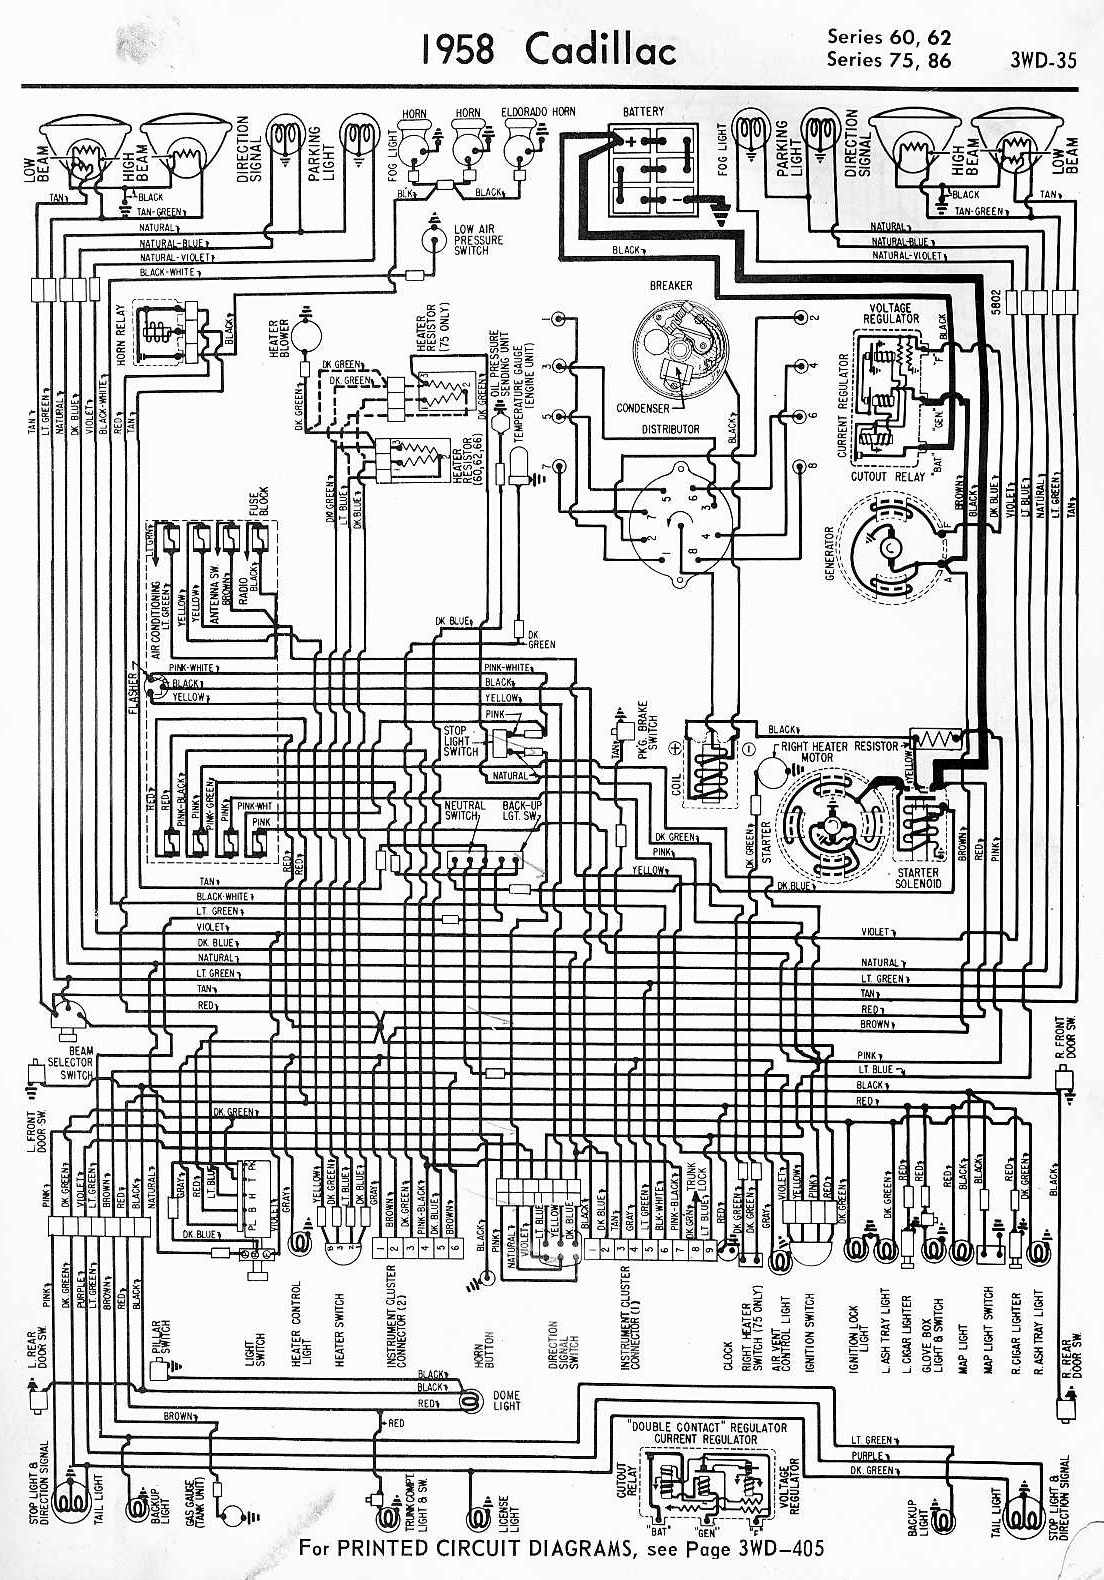 1966 Cadillac Deville Wiring Diagram - All of Wiring Diagram